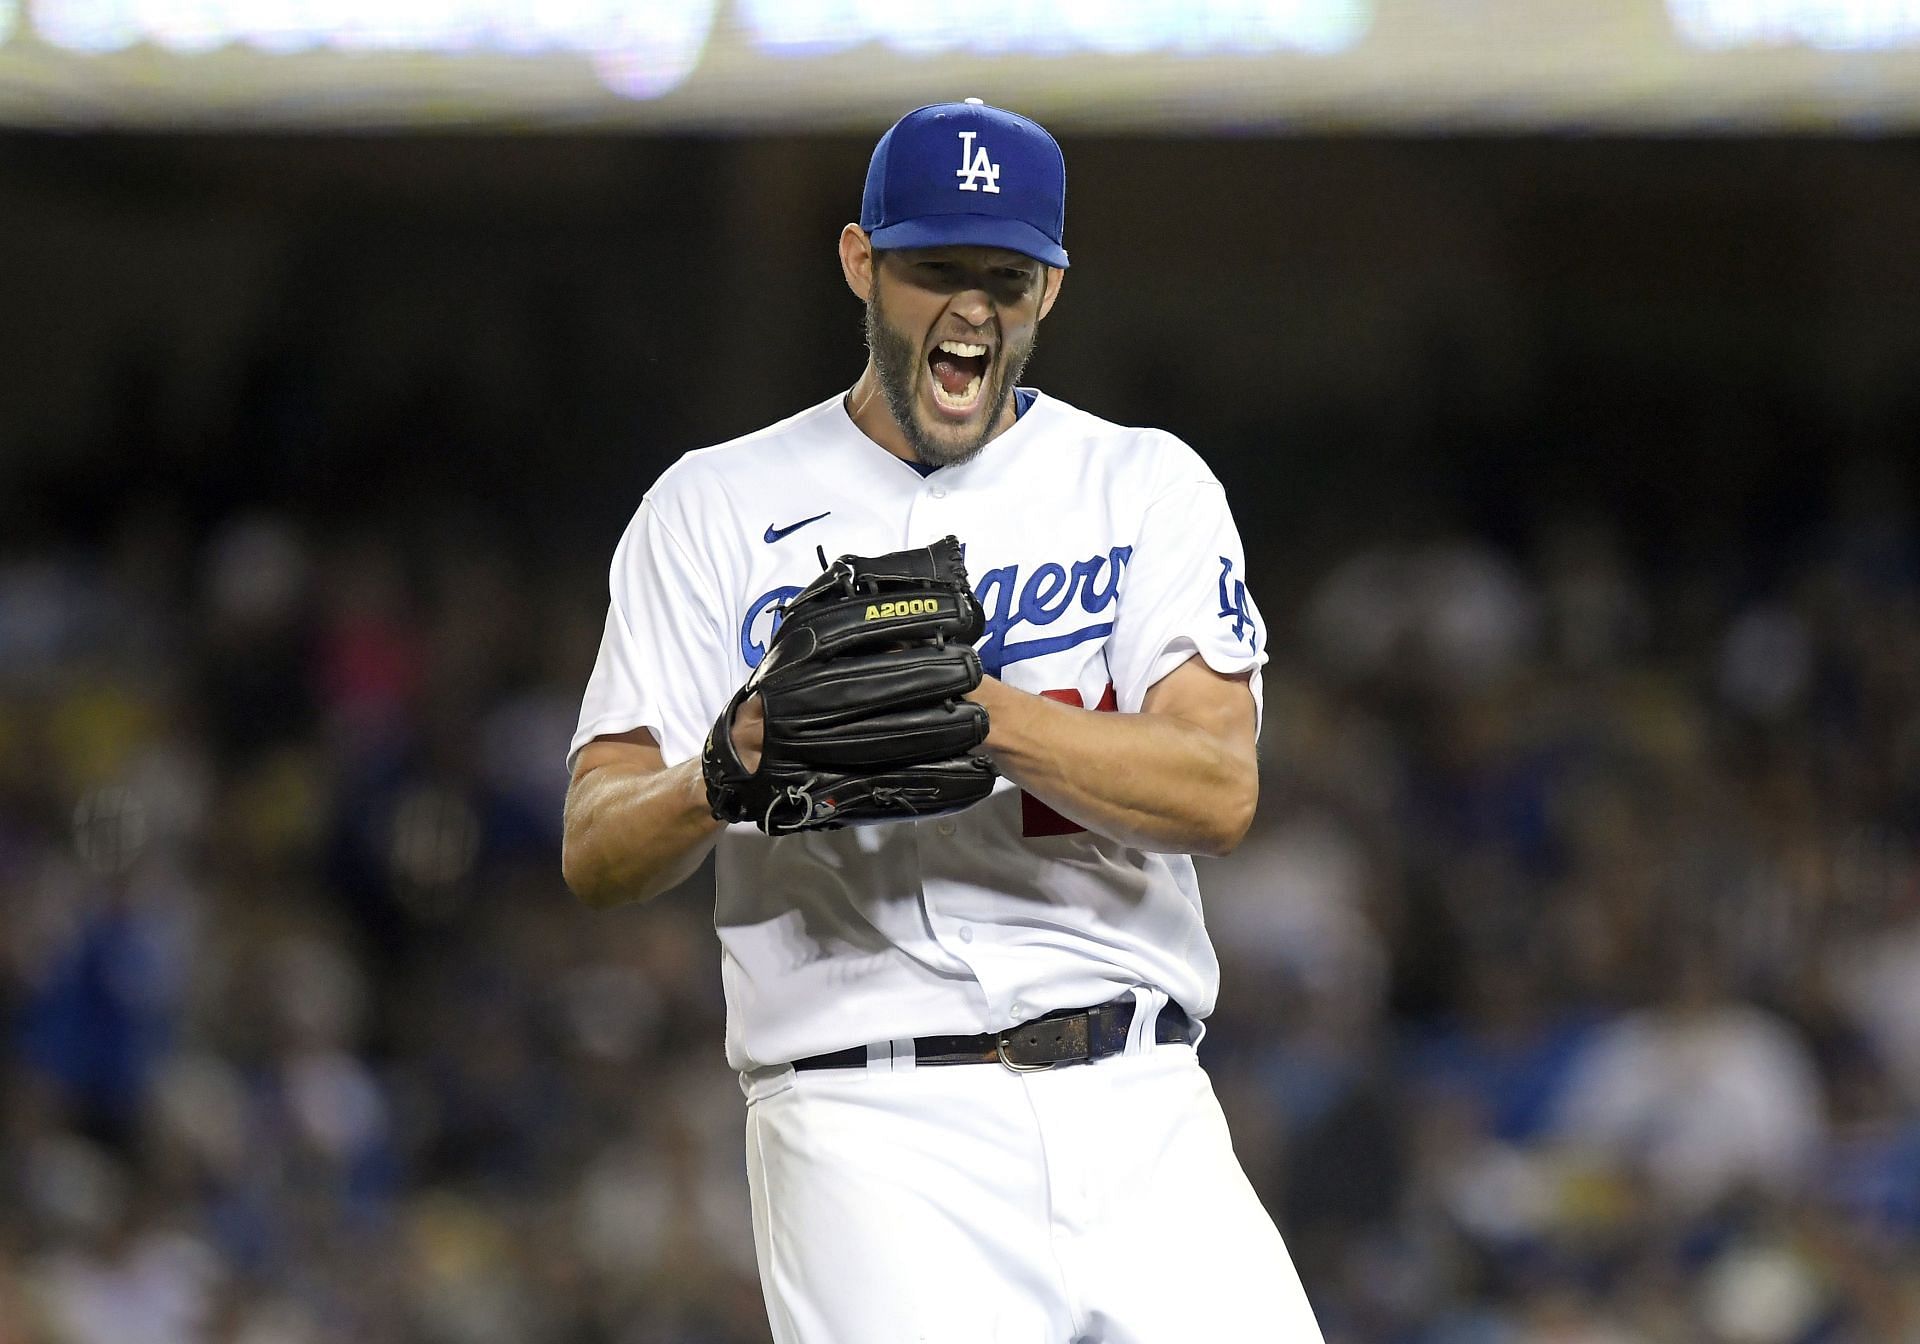 Clayton Kershaw won his 100th game as a Dodger last night